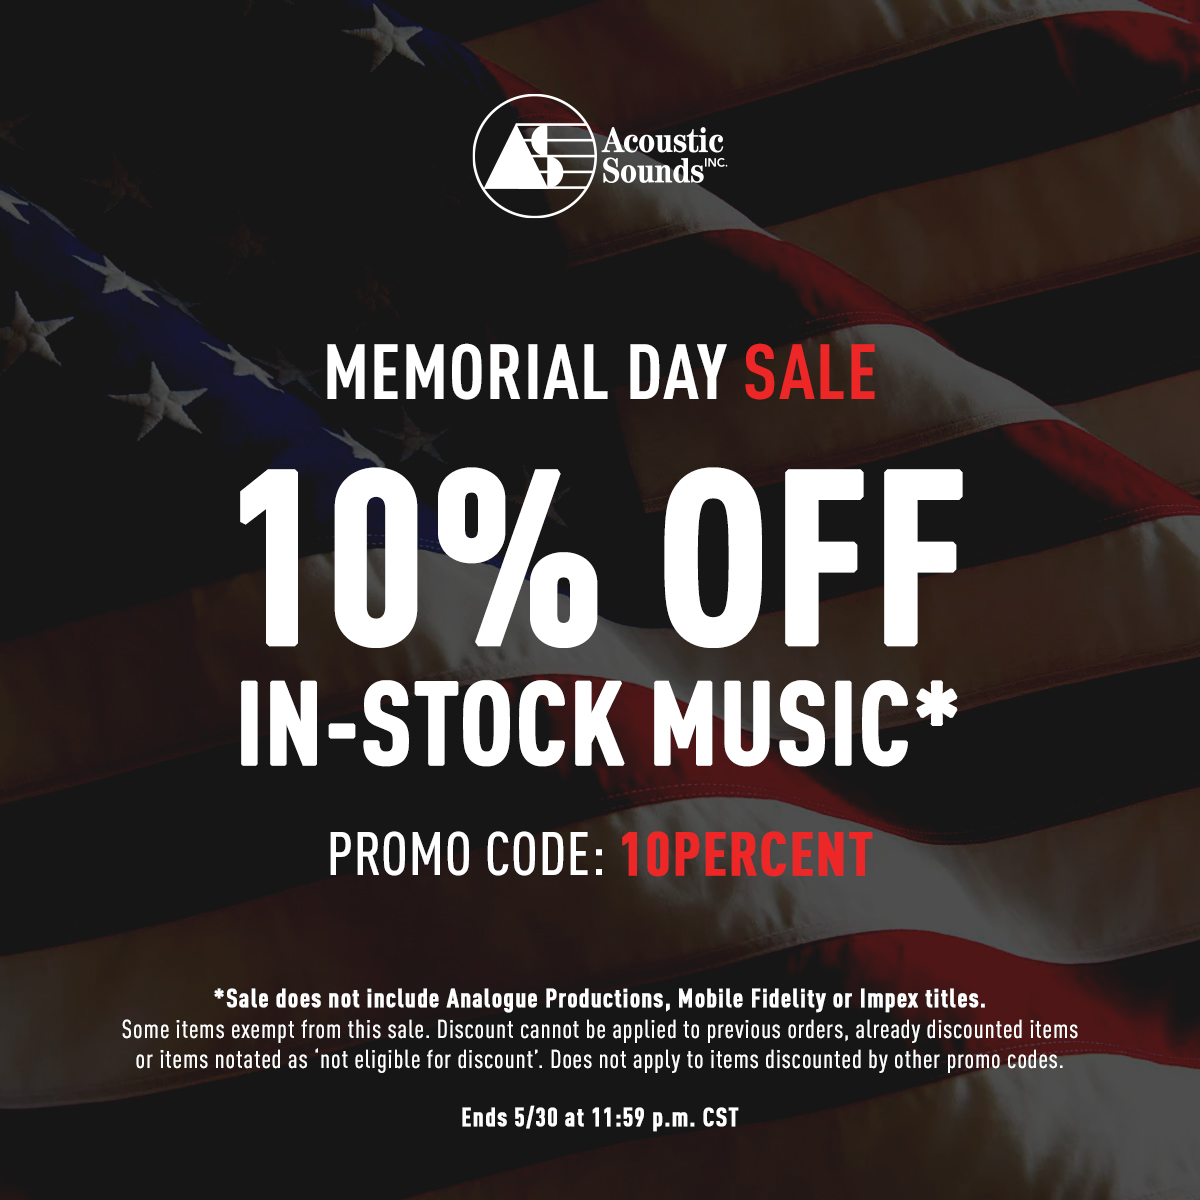 Memorial  Day sale, 10% off in-stock music. Sale does not include Analogue  Productions, Mobile Fidelity or Impex titles. Discount cannot be applied  to already discounted items; other conditions apply. Celebrate summer's  arrival with great new music! #memorialdaysale #vinyllps